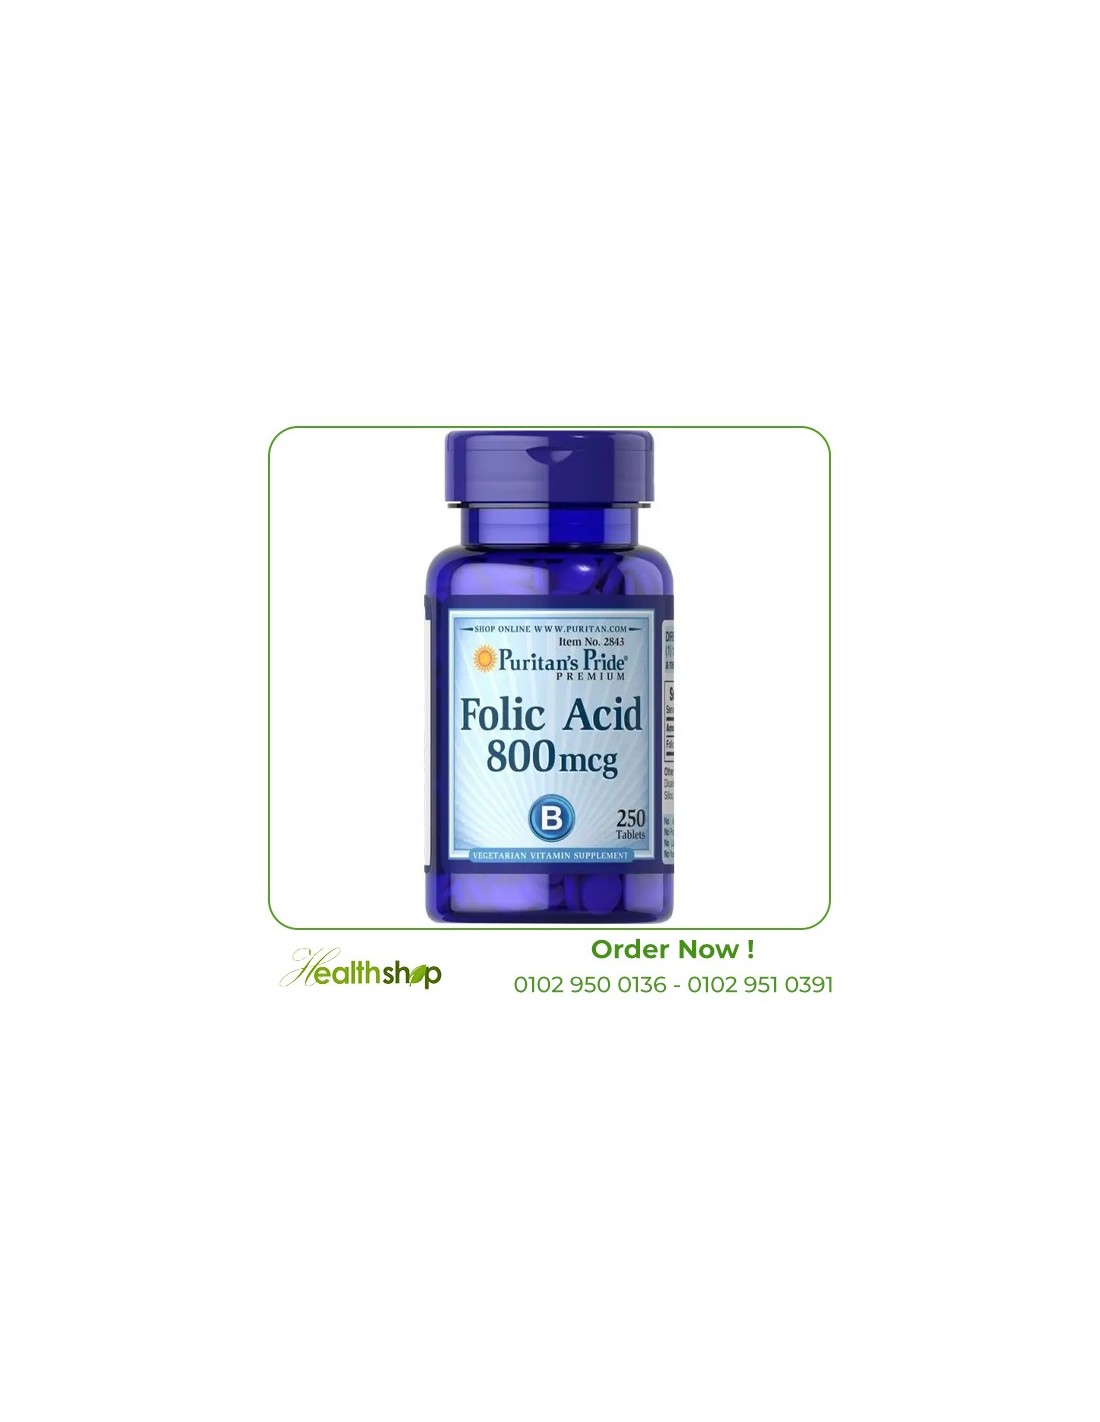 Learn more about the benefits and prices of folic acid in Egypt